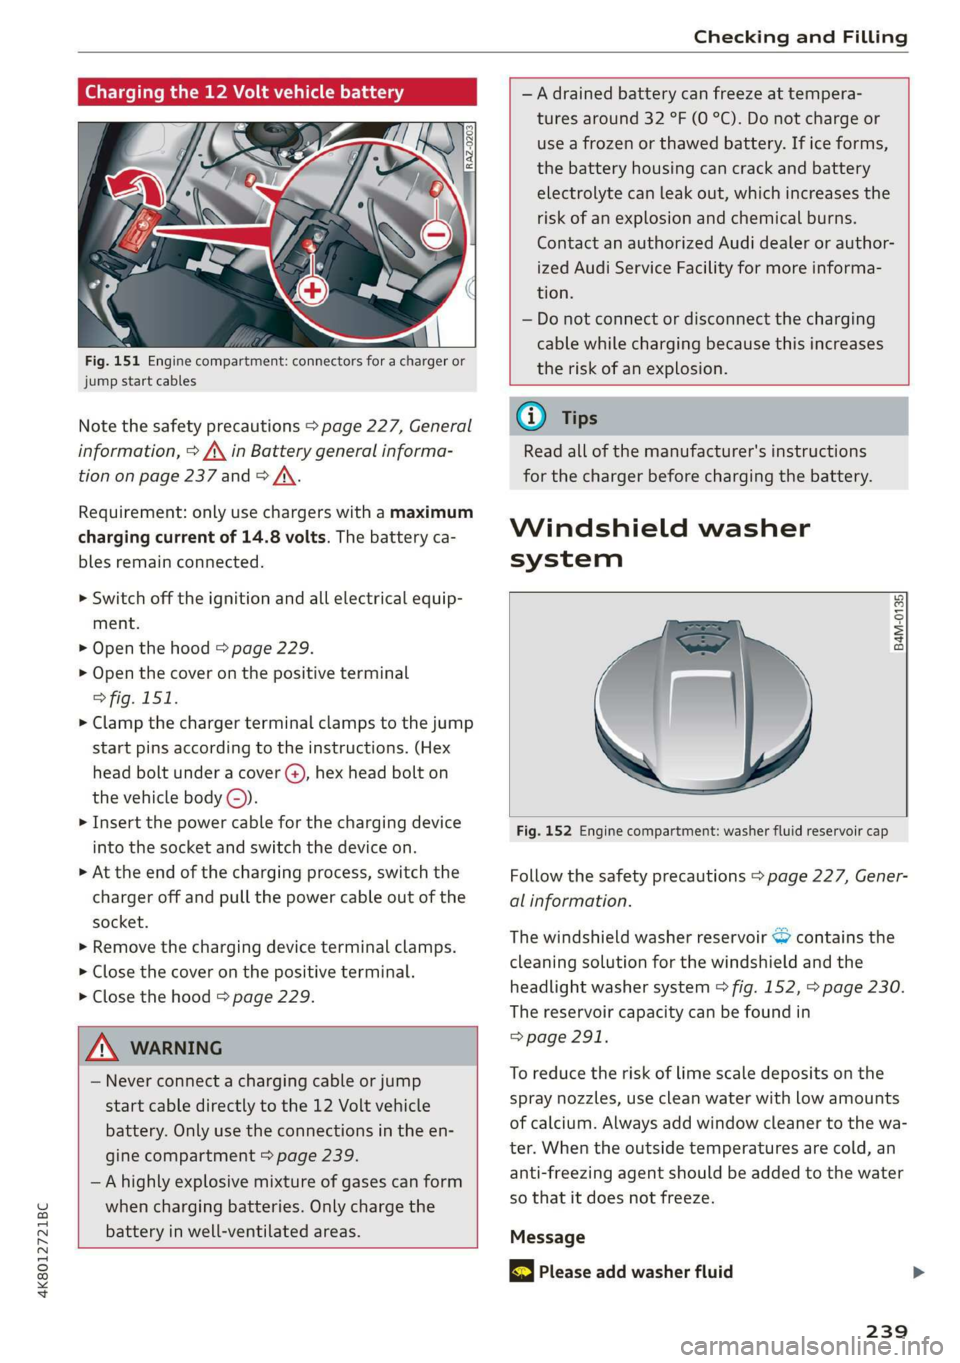 AUDI A7 2020  Owners Manual 4K8012721BC 
Checking and Filling 
  
Charging the 12 Volt vehicle battery   
  
Fig. 151 Engine compartment: connectors for a charger or 
jump start cables 
Note the safety precautions > page 227, Ge